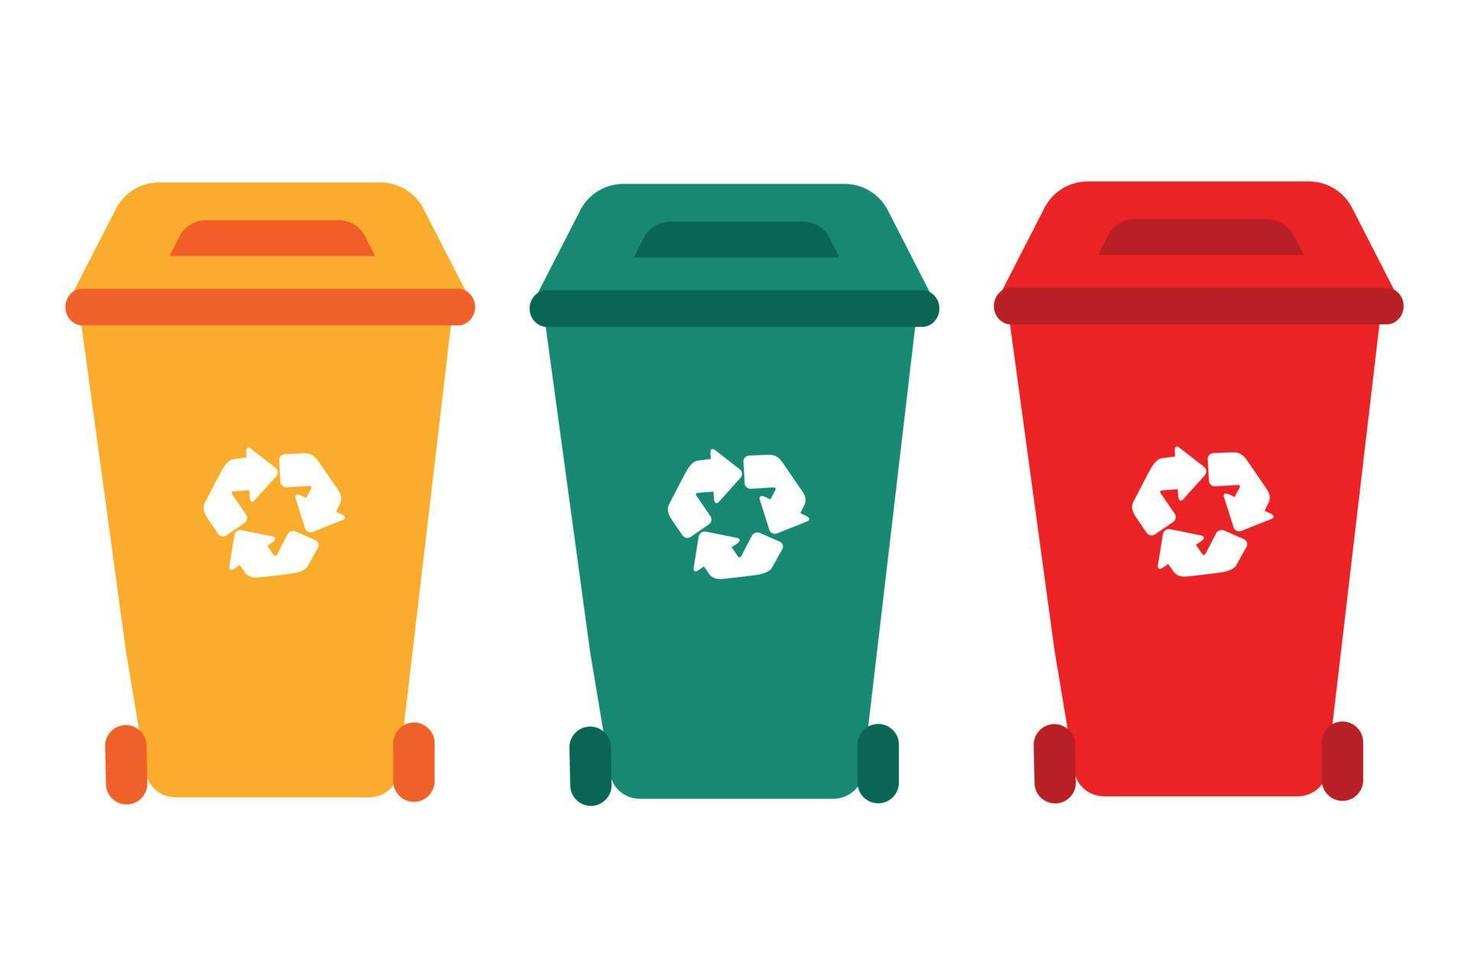 Colorful bins with recycle symbol, vector. Isolate on white background vector